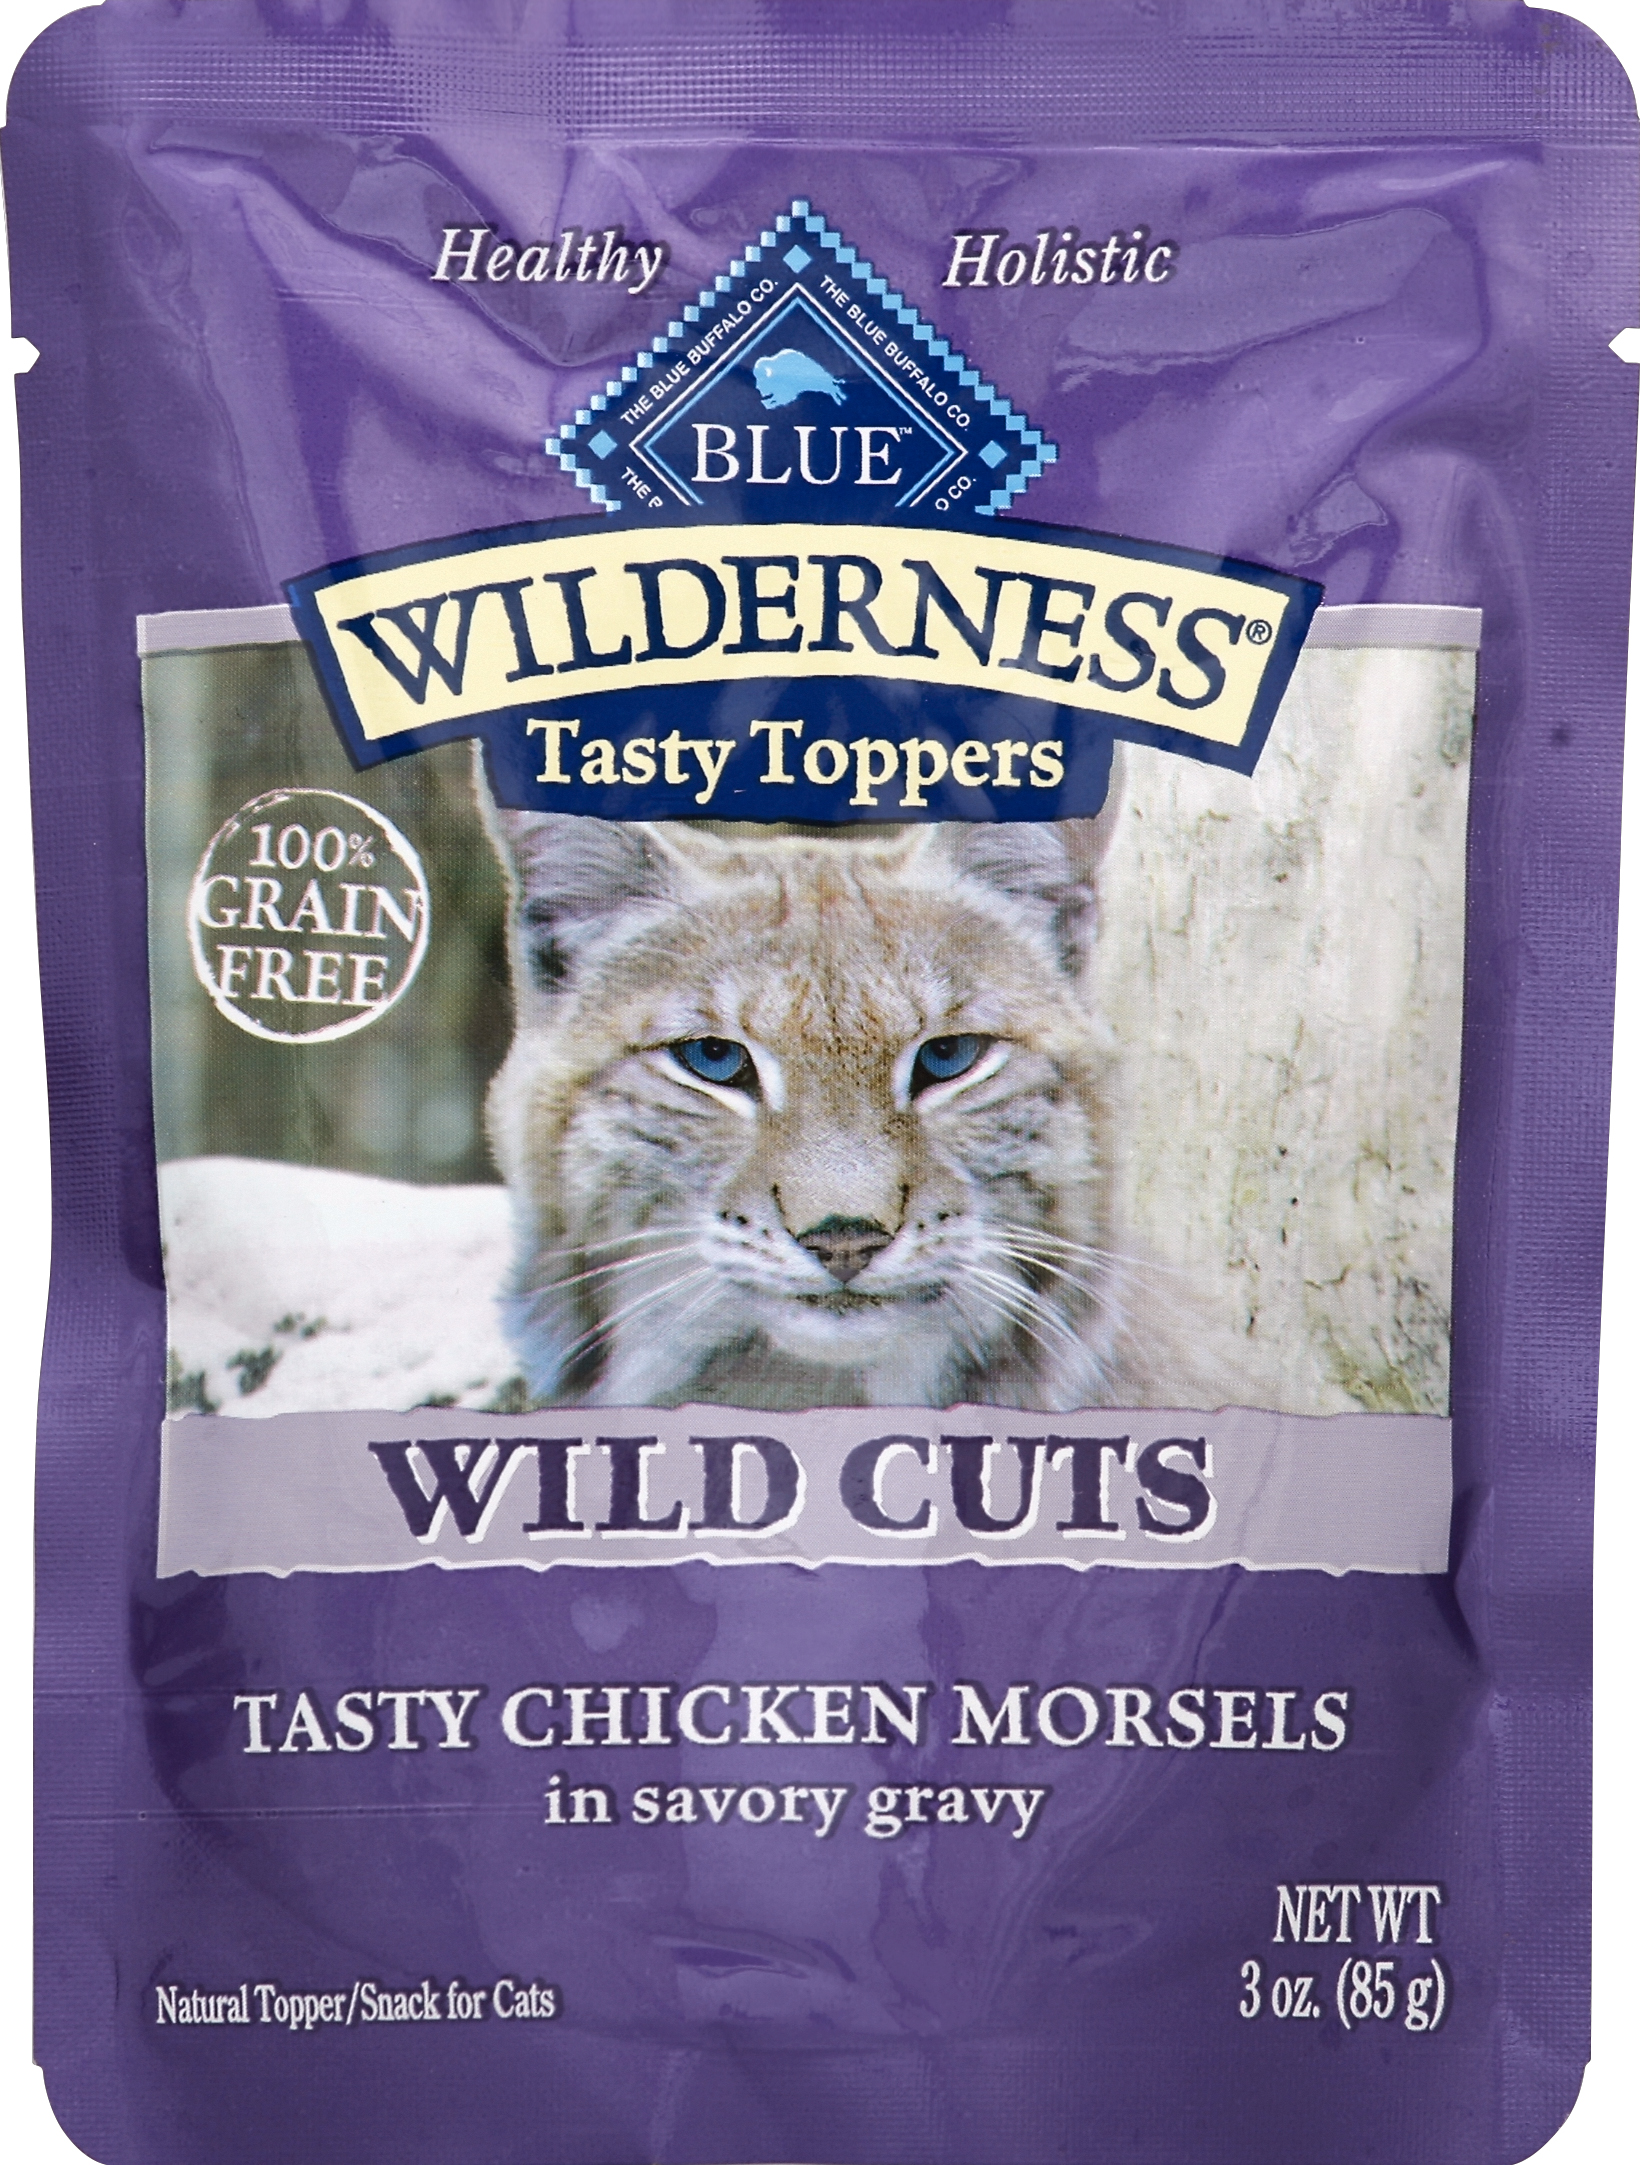 Blue Topper/Snack for Cats 3 oz